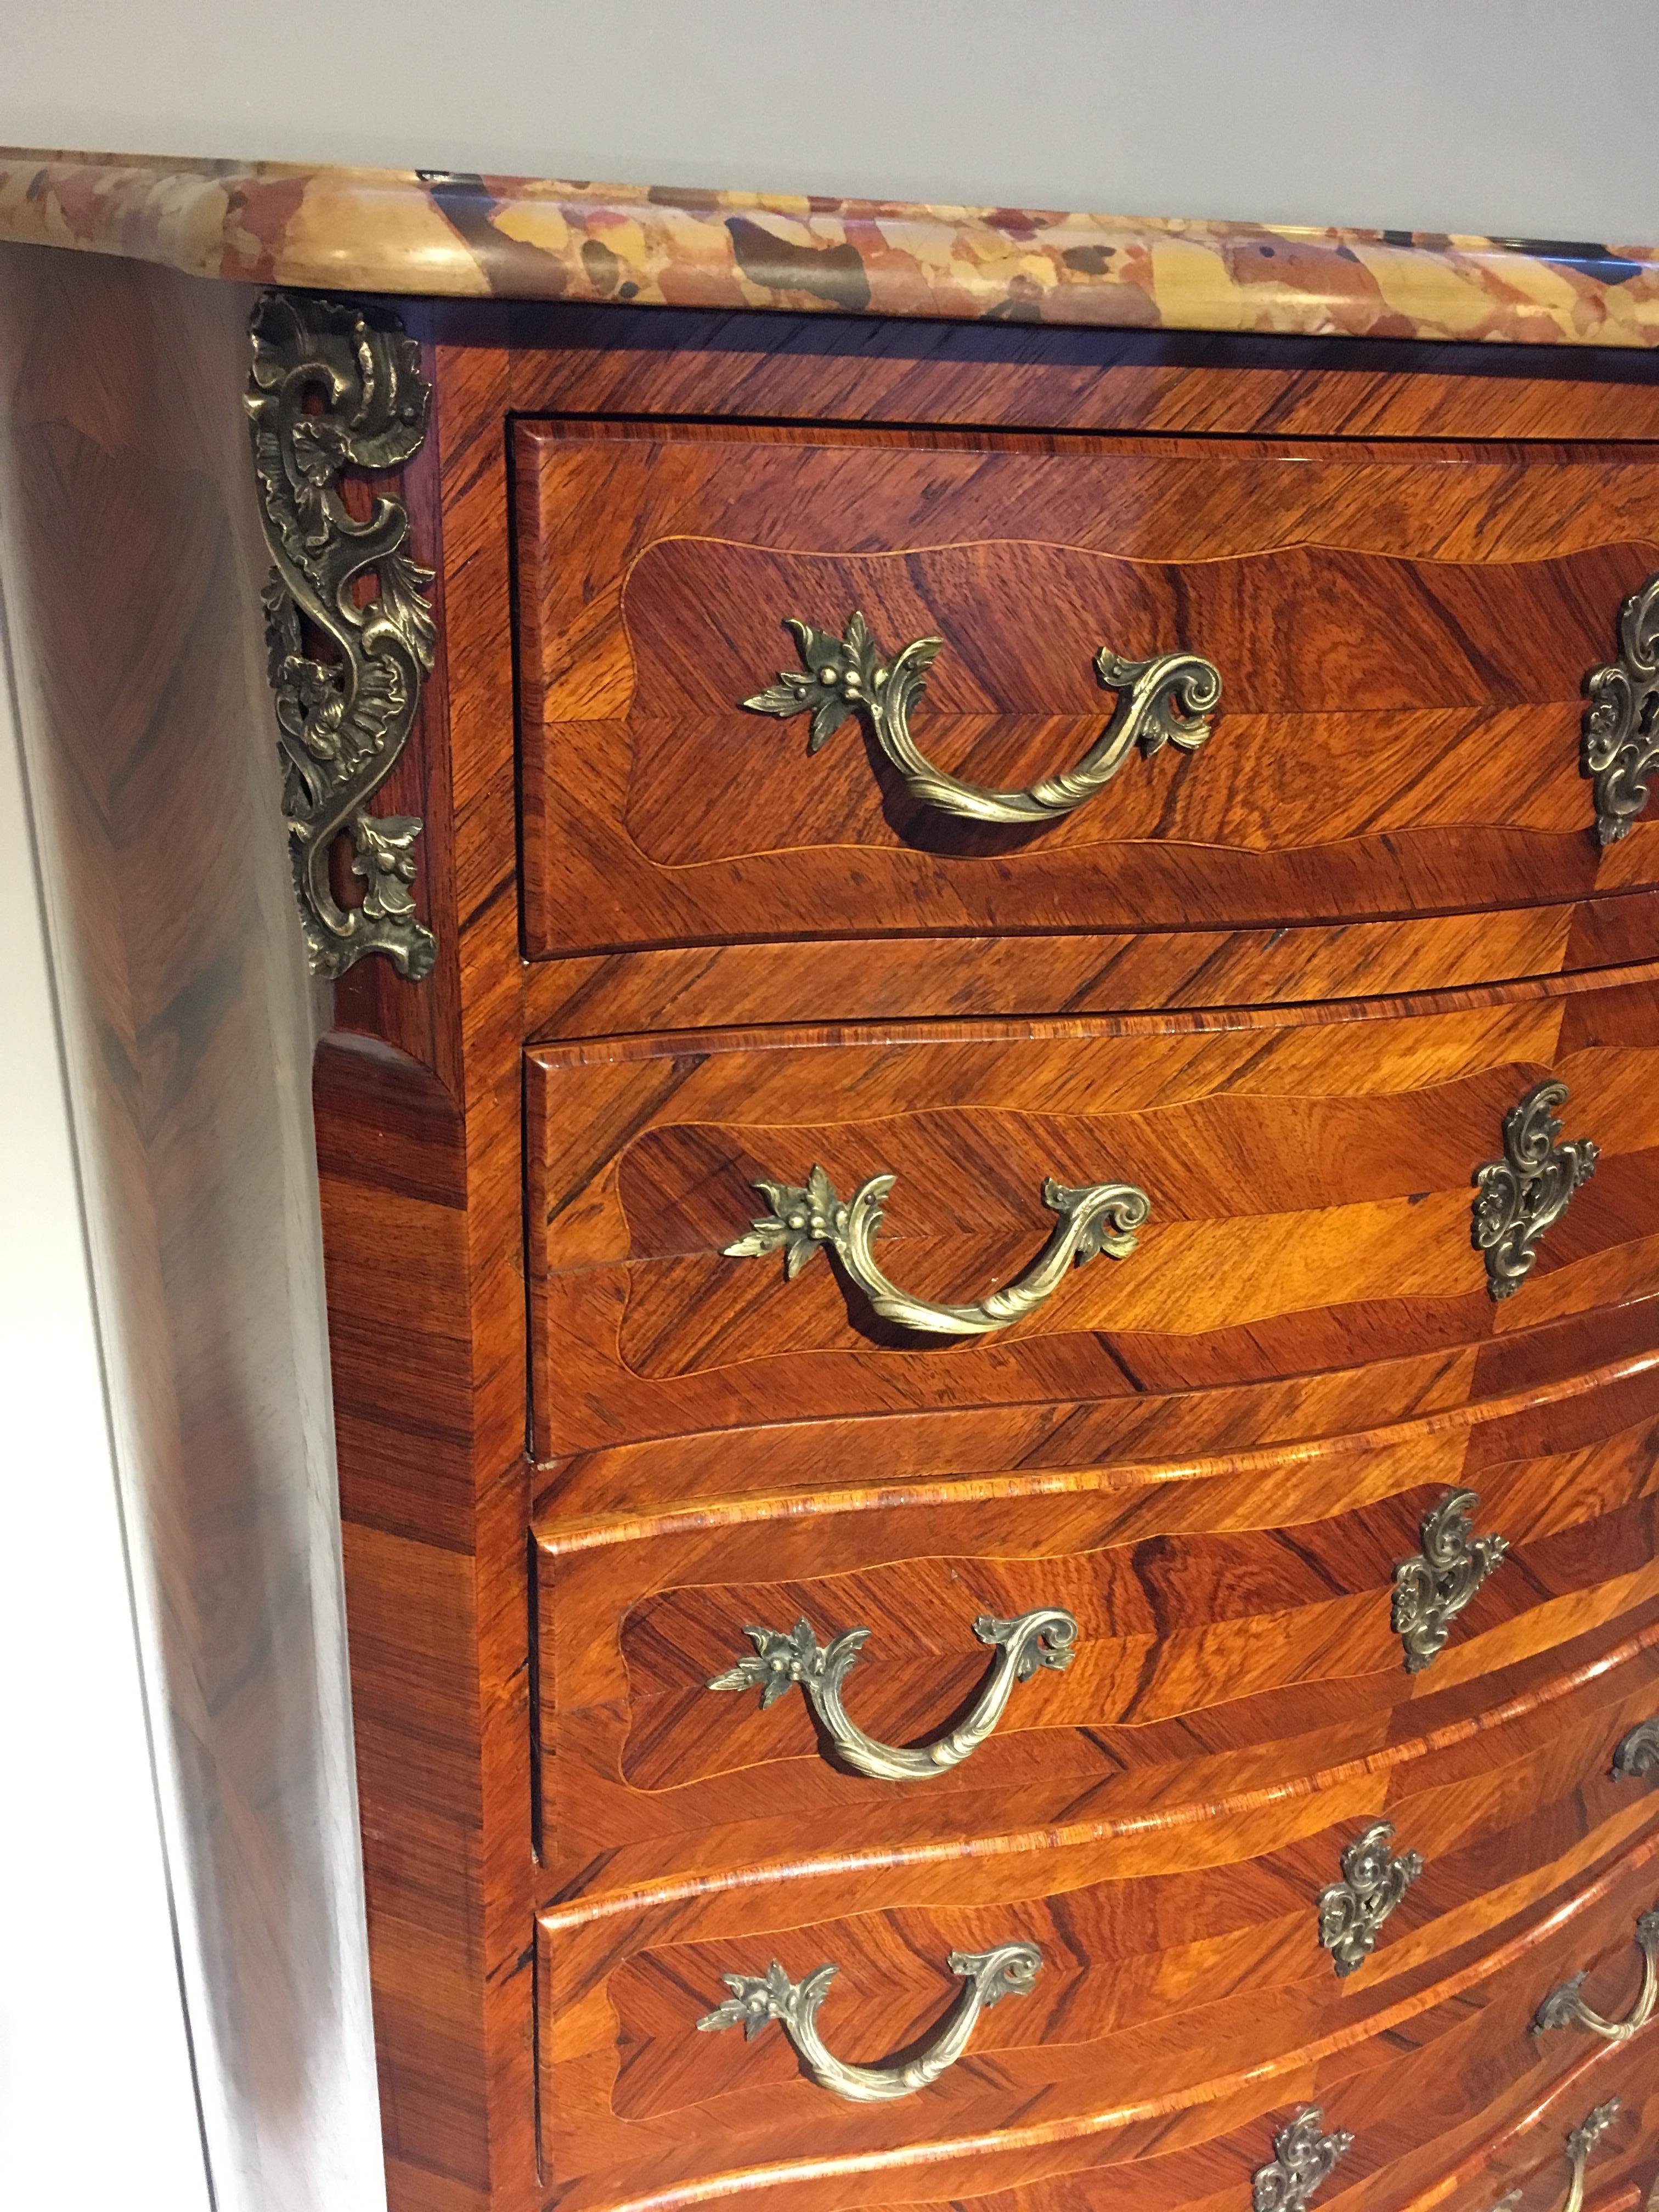 Early 20th tall narrow chest of drawers, known as a semainier (drawer for every day of the week.. 

French dating to circa 1910 this piece is veneered with king wood original ormolu mounts.

This piece has been through our workshops been cleaned